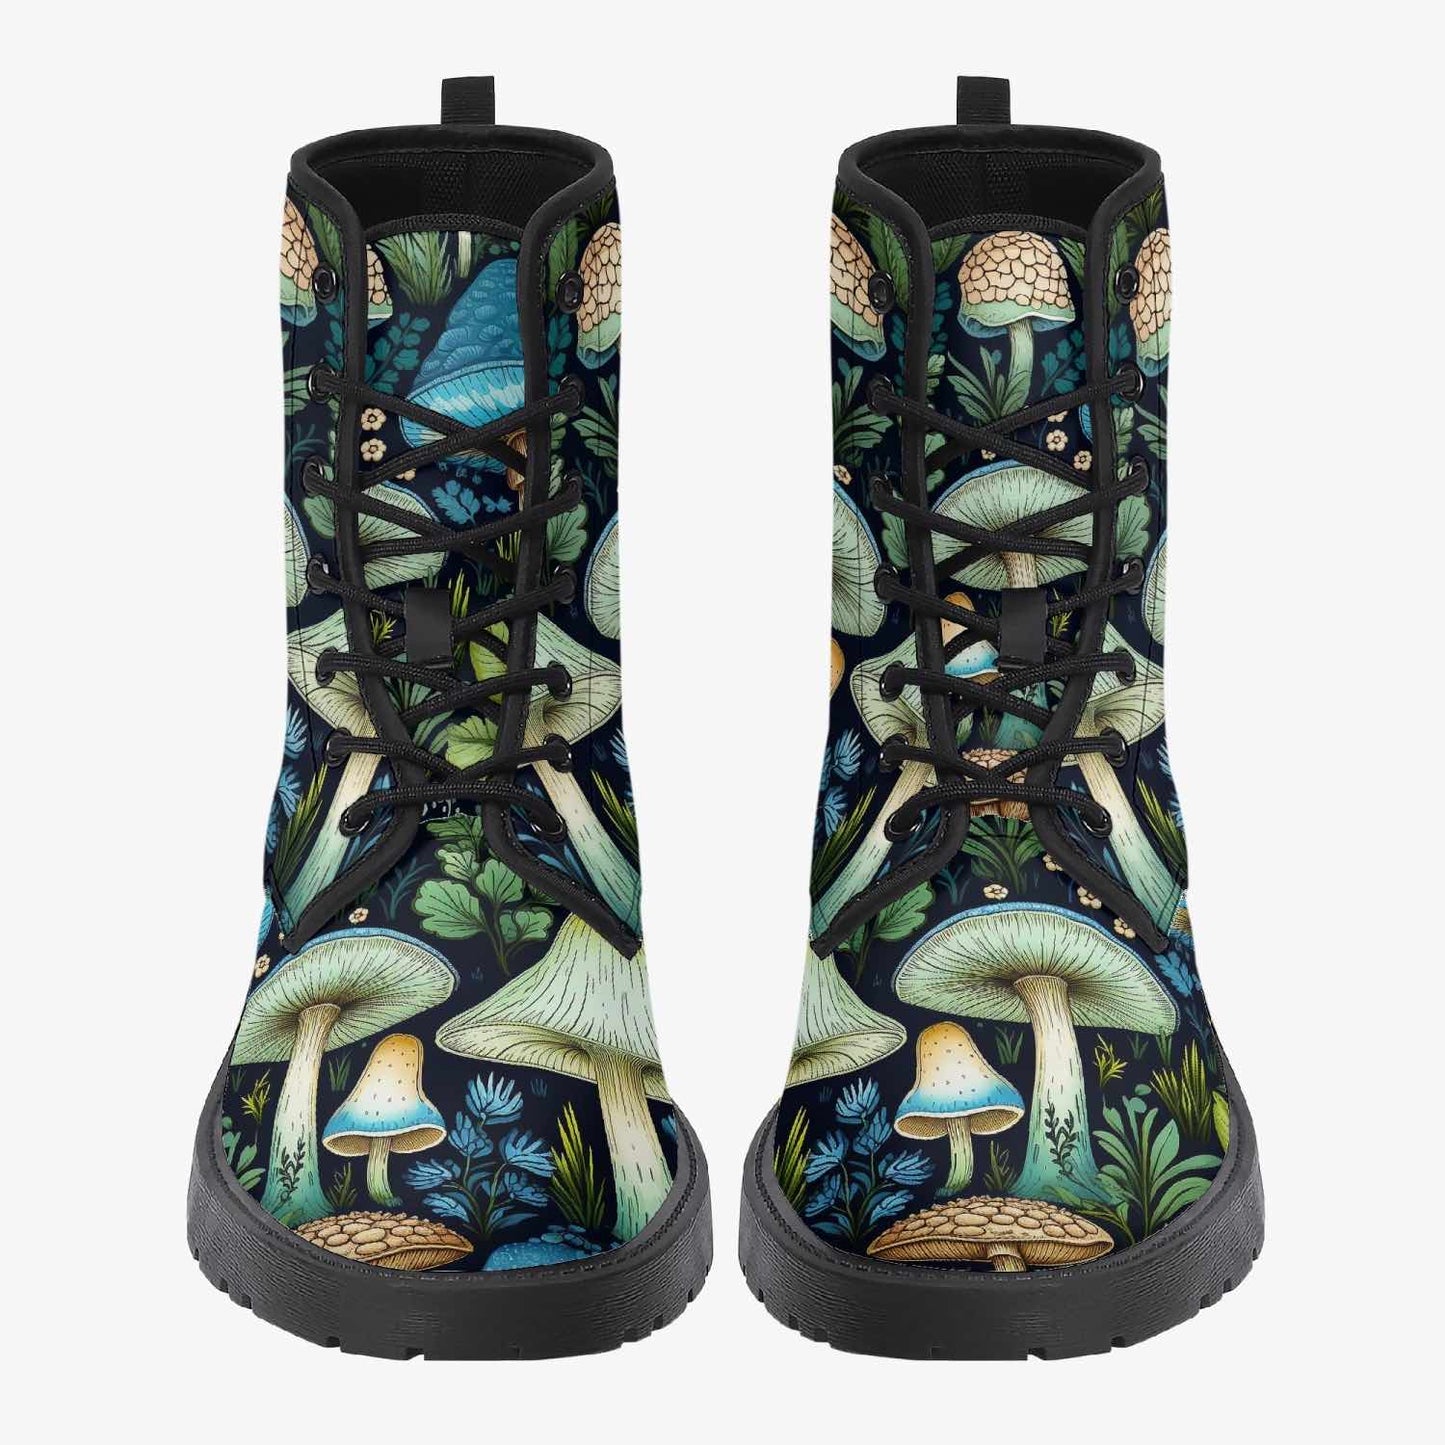 Mushroomcore Deep in the Forest Women's Boots, FREE Shipping